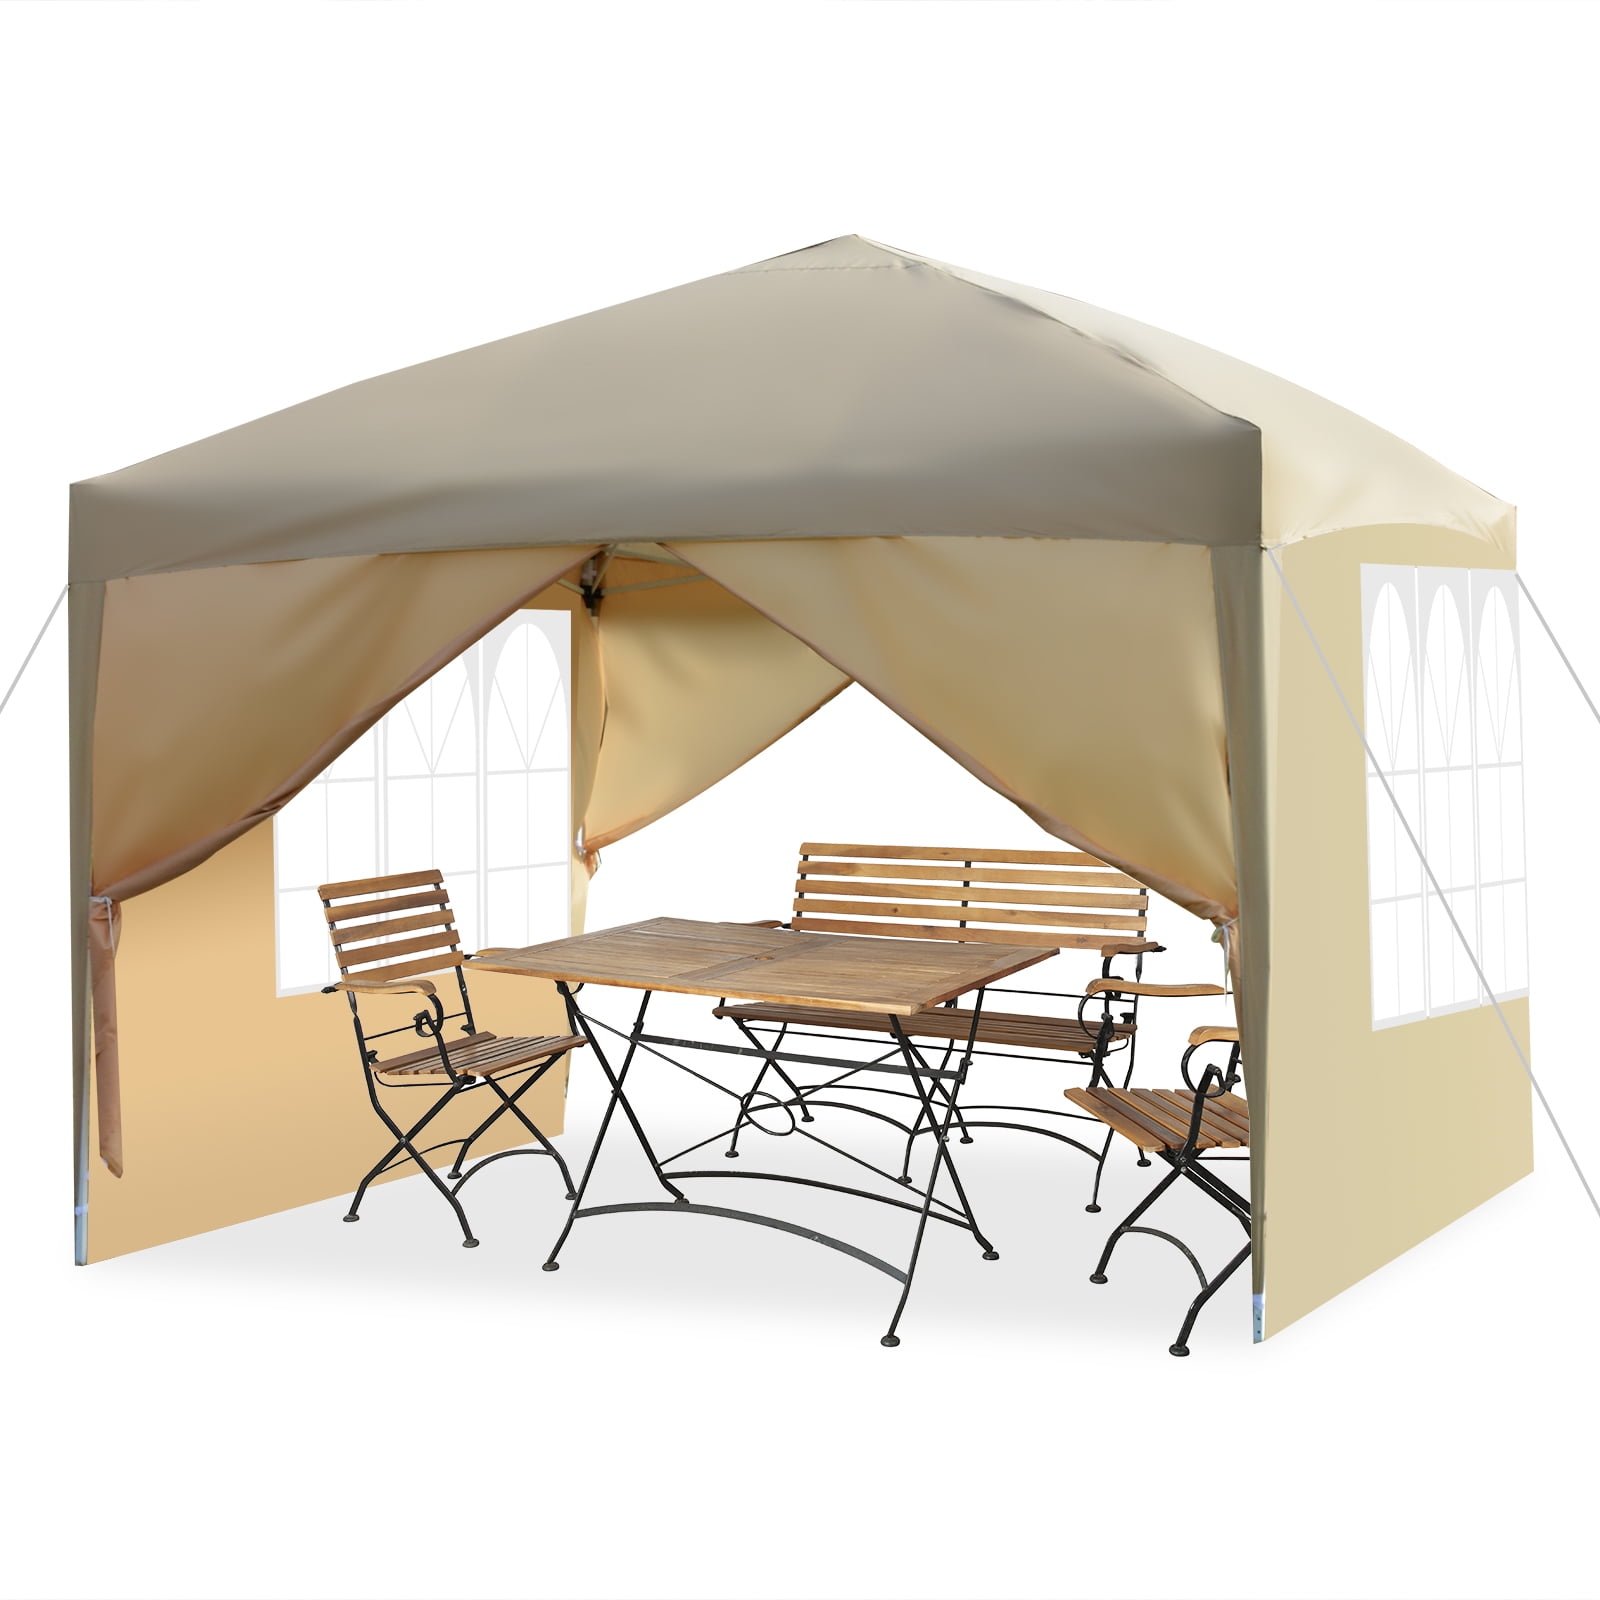 PARTS ONLY....Airwave Four Seasons Essential 2.5 x 2.5 Pop Up Gazebo with Sides. 